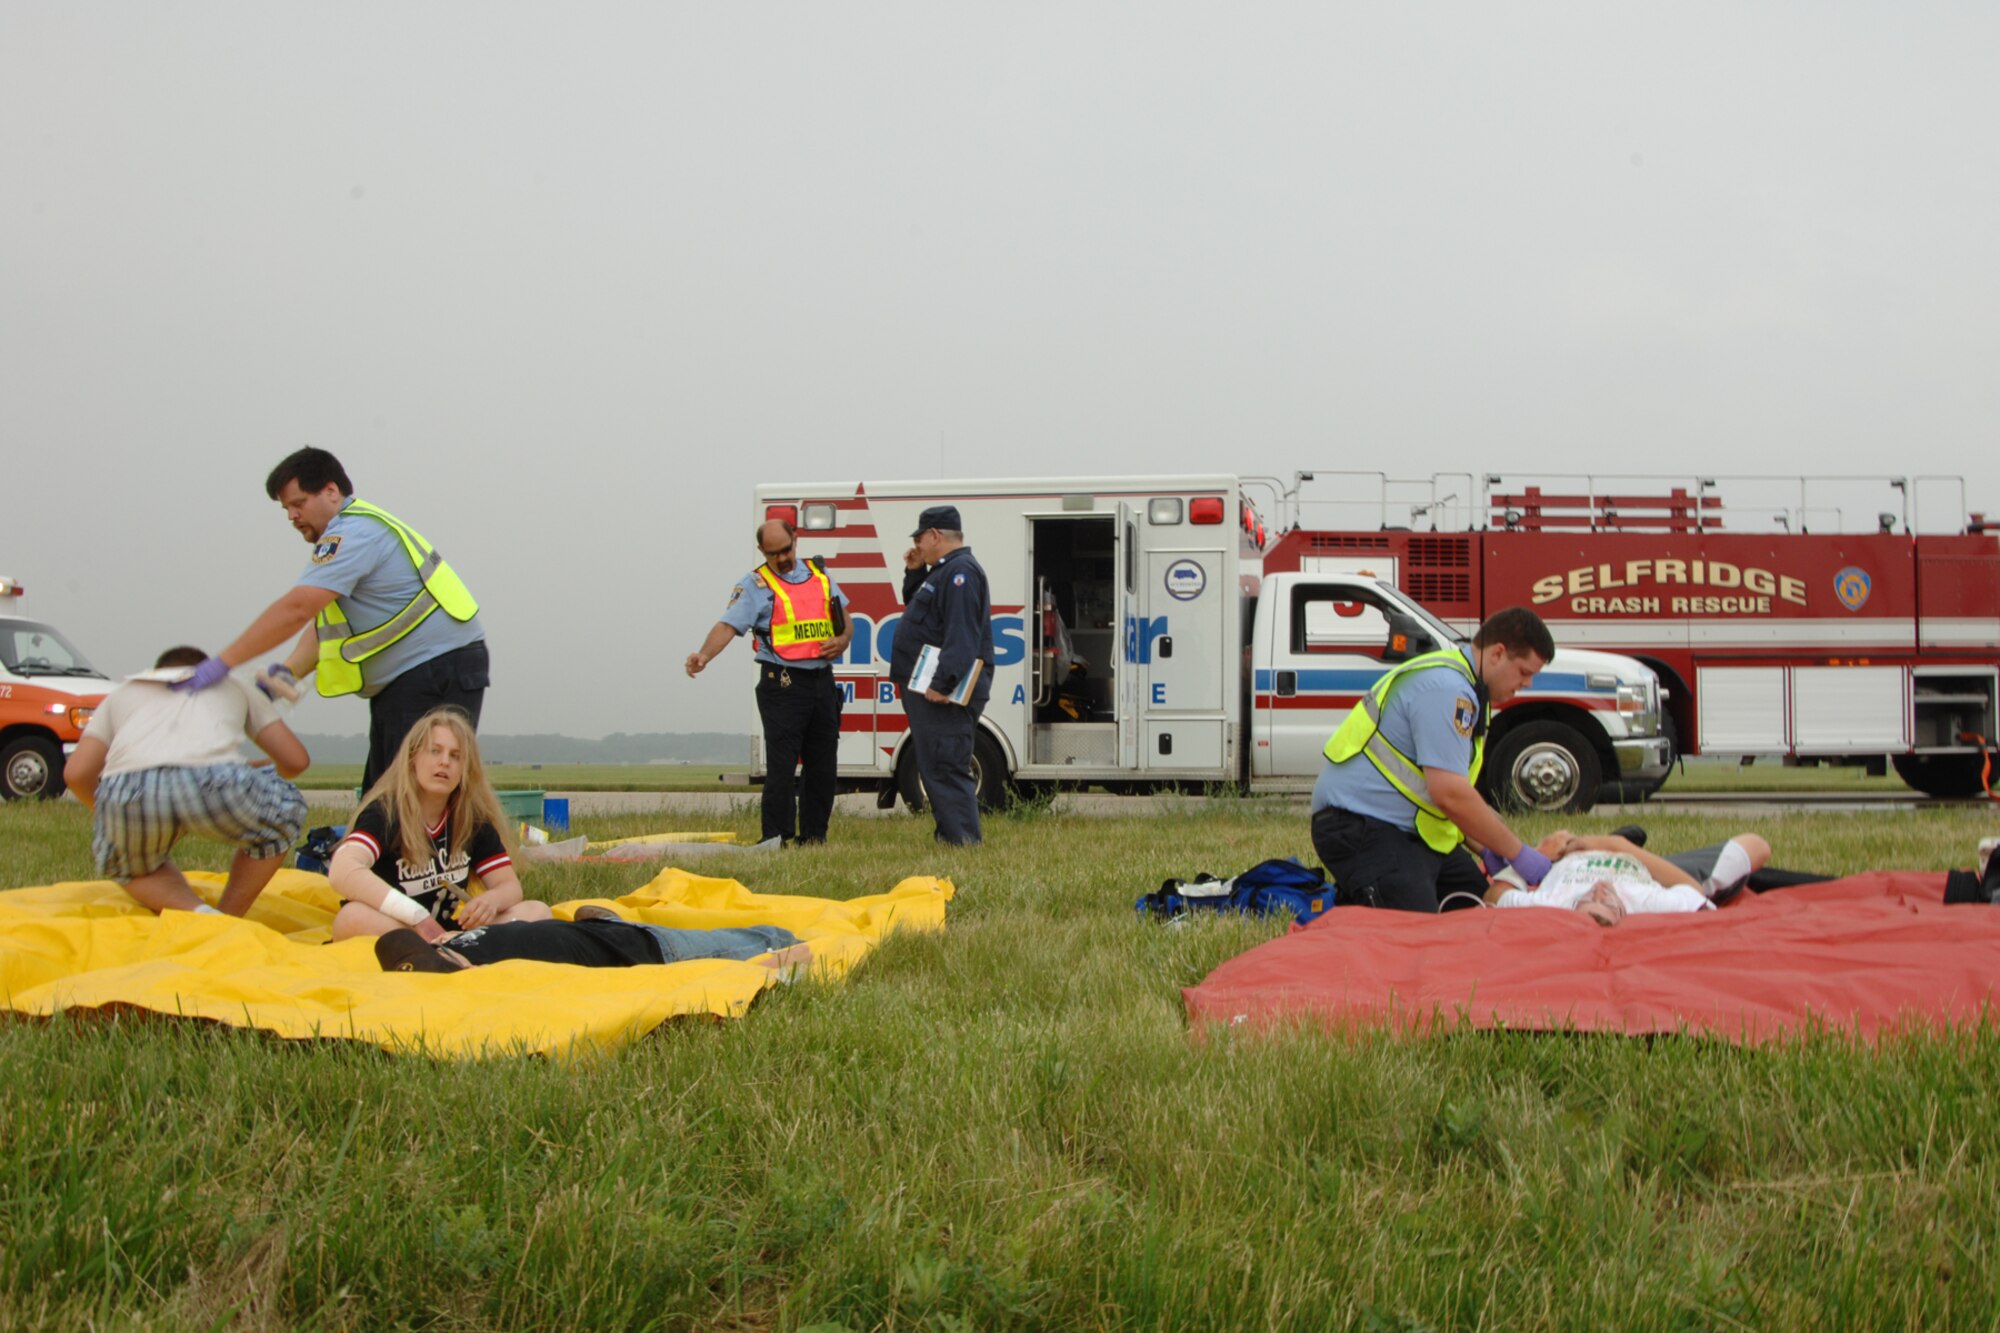 Selfridge firefighters work with emergency medical technicians from the MedStar ambulance service to treat people with simulated casualties during a Major Accident Response Exercise at Selfridge Air National Guard Base, Mich., June 21, 2011. Military planners at the base often invite local agencies, such as MedStar, to participate in base exercises to enhance the readiness of all personnel to respond to a major incident. (USAF photo by Rachel Barton, 127th Wing Public Affairs)